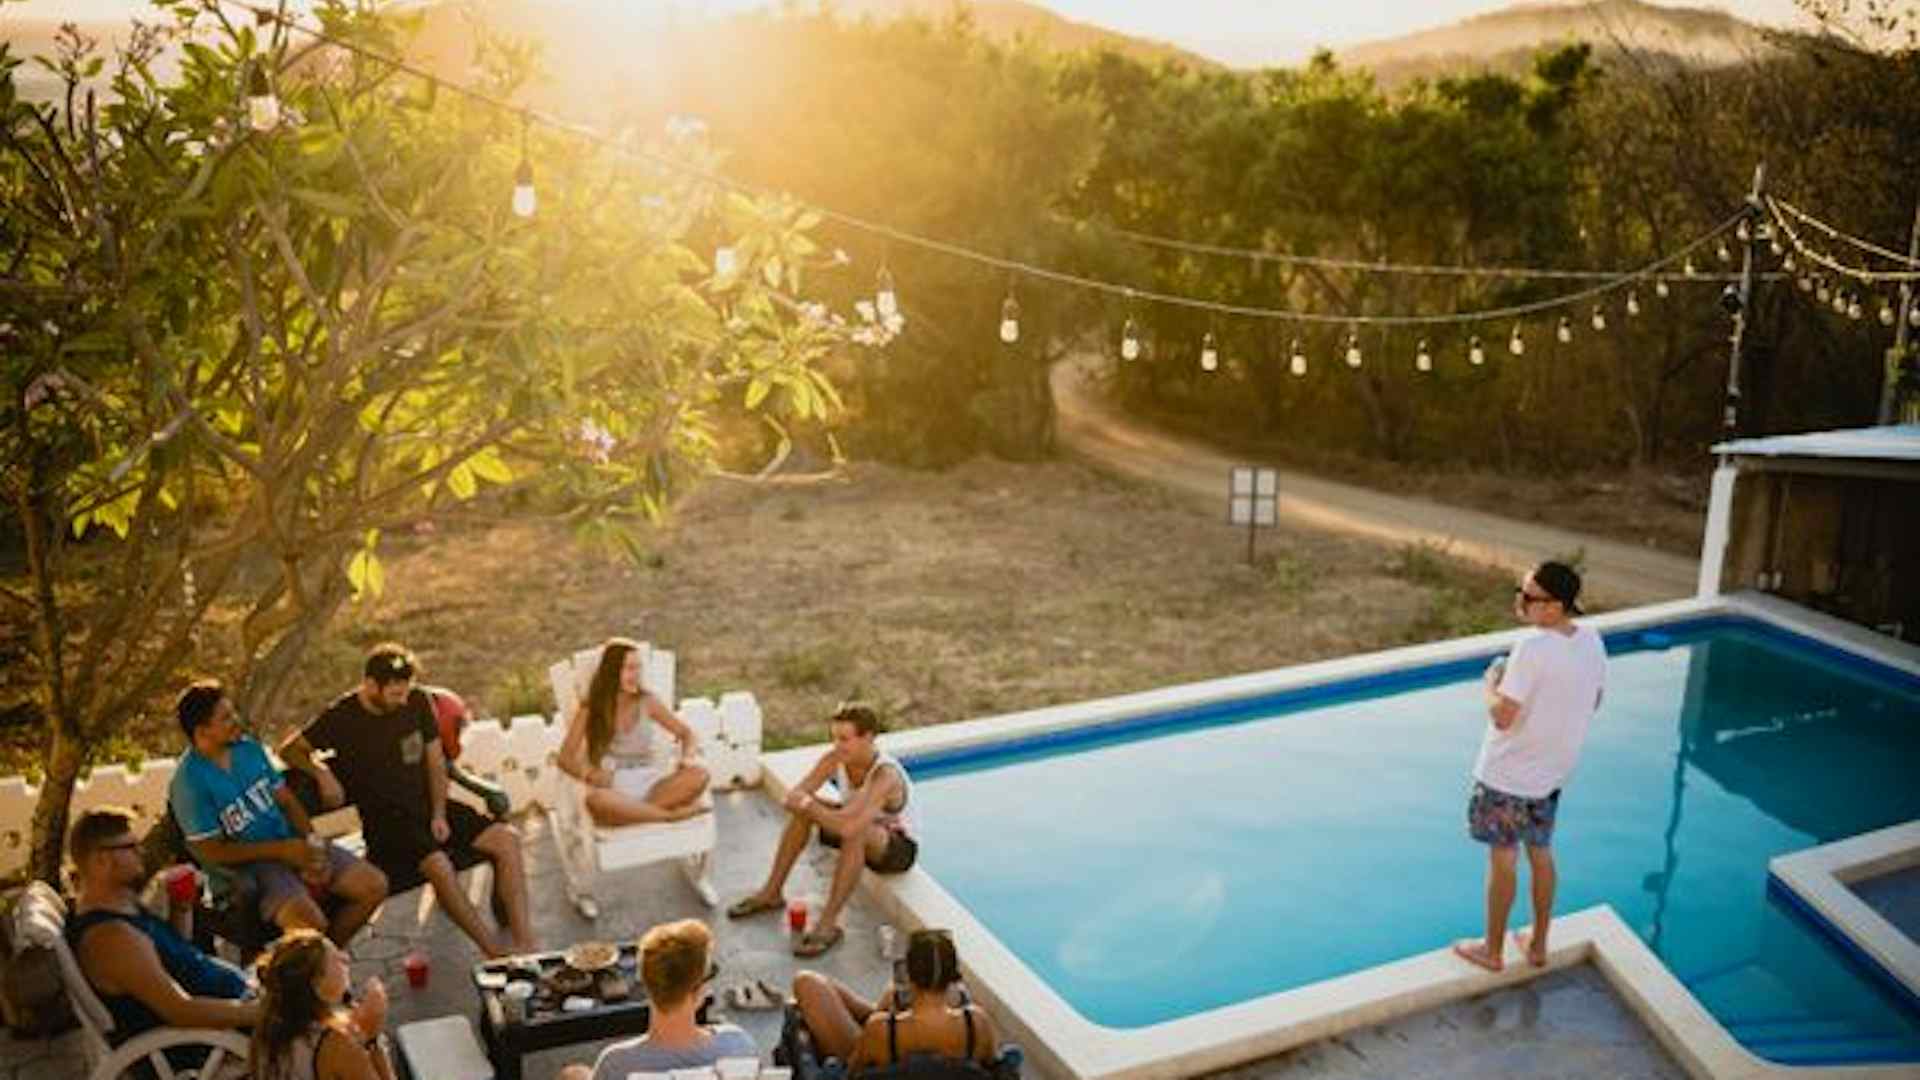 Hire Space's Top 5 Summer Party Picks